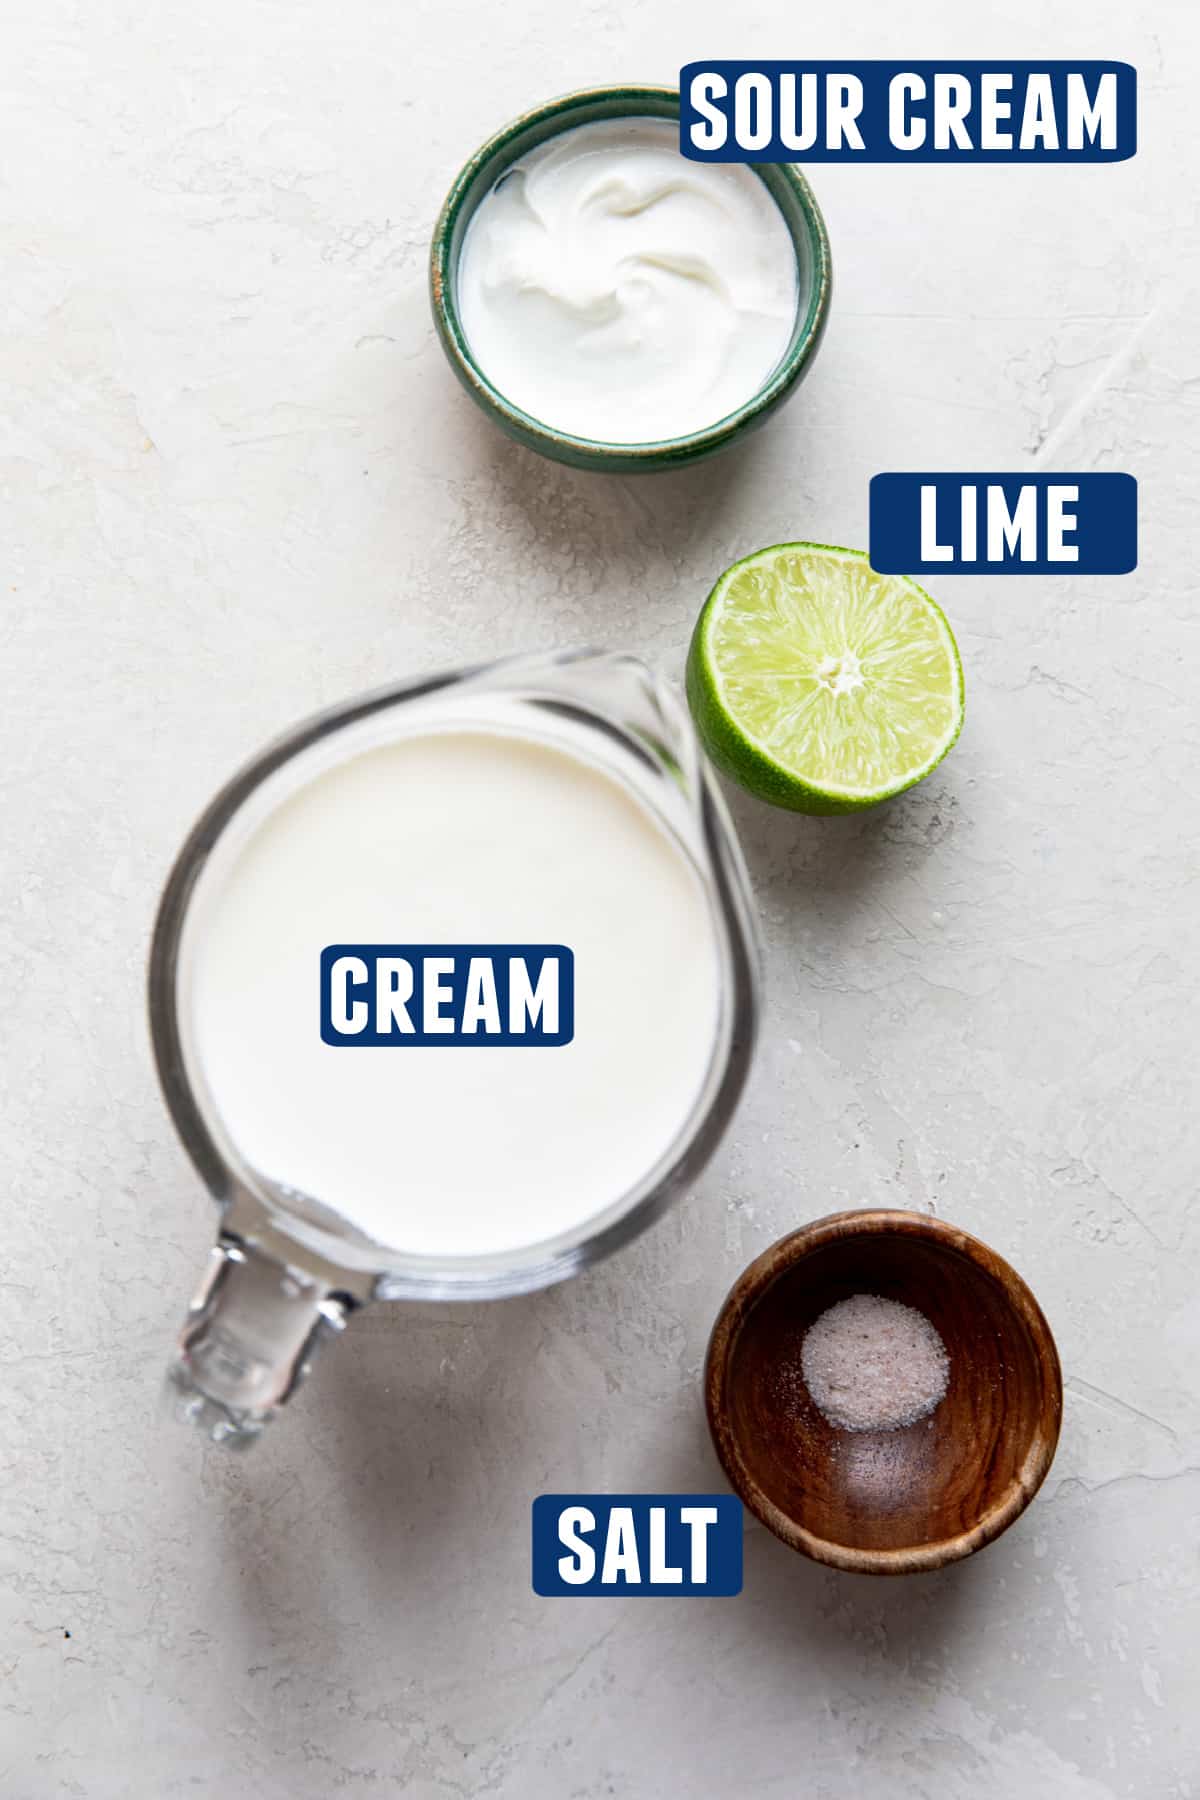 Ingredients needed to make homemade mexican crema laid out on the counter. A measuring glass of cream, bowl of sour cream, half a lime, and a small amount of salt.